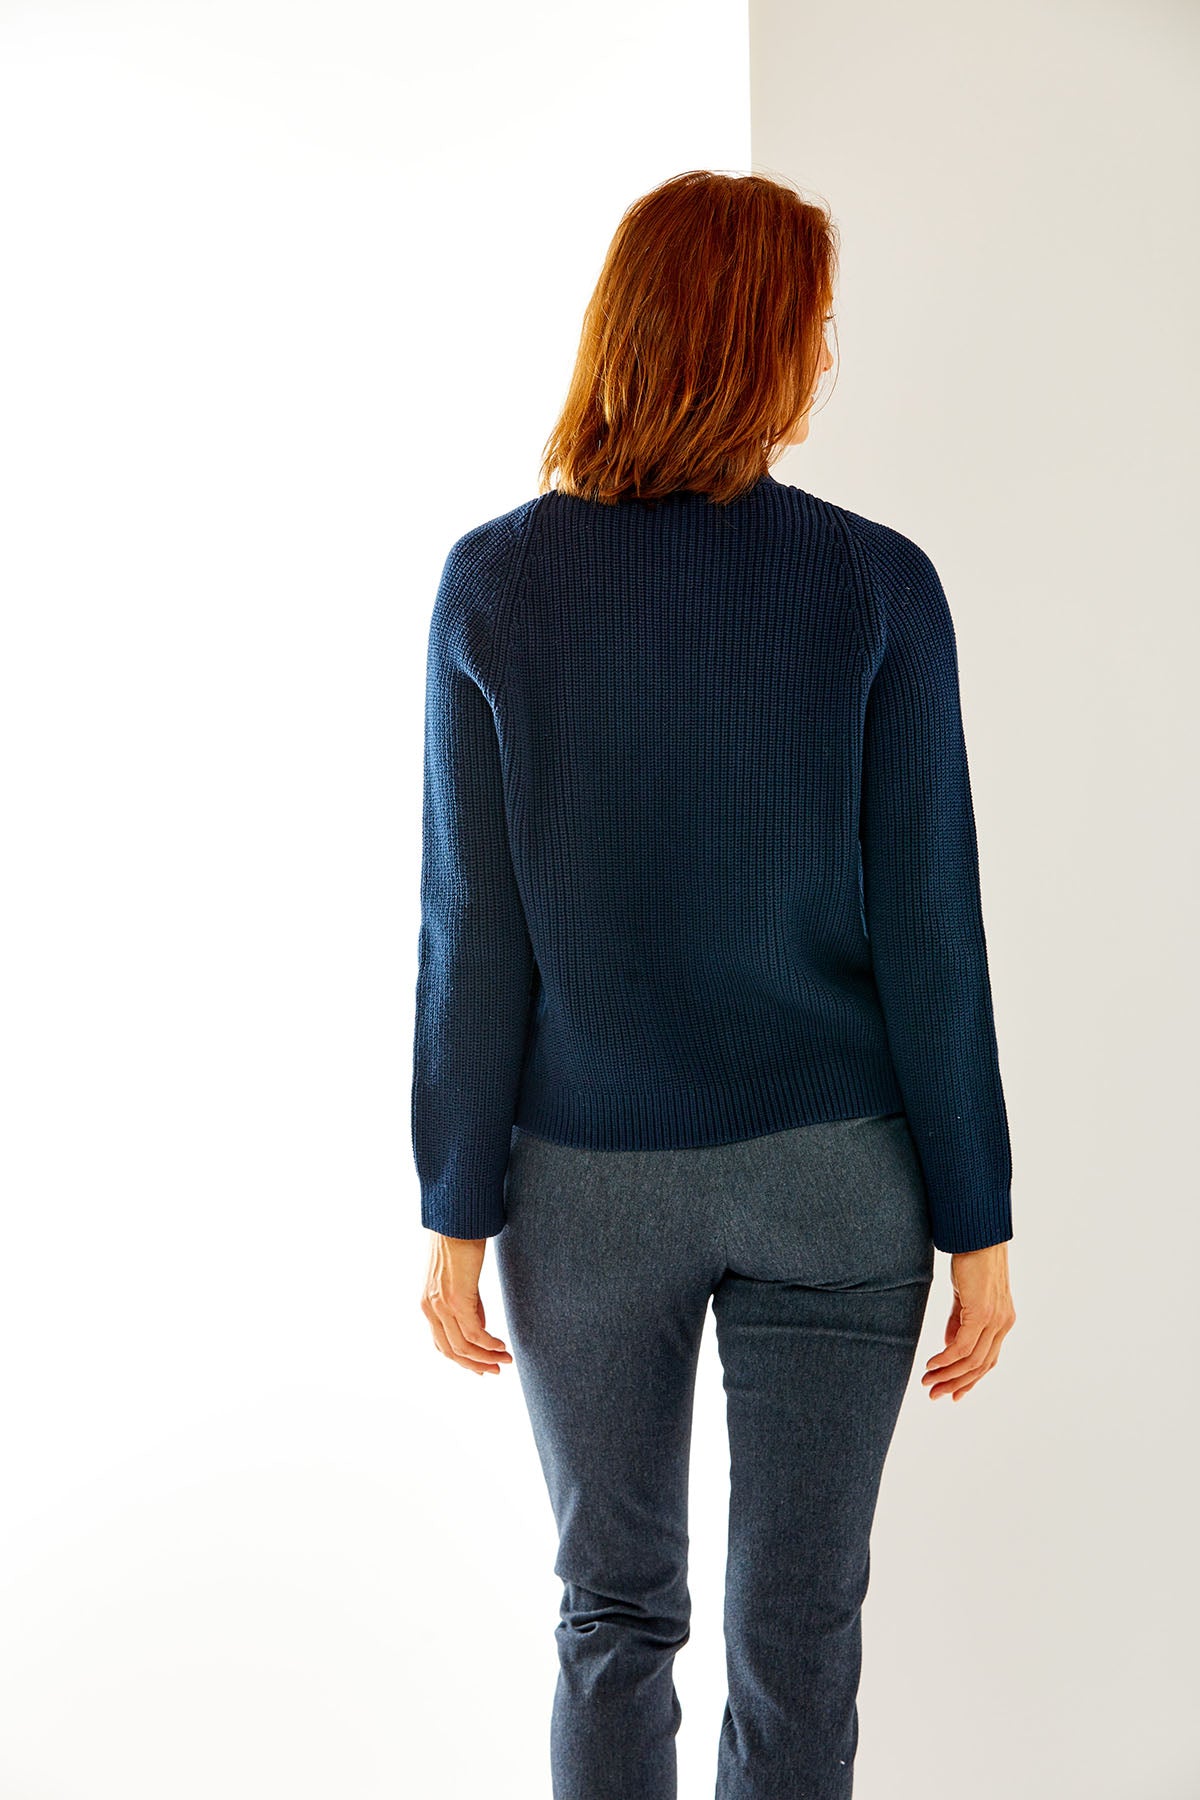 Woman in navy sweater